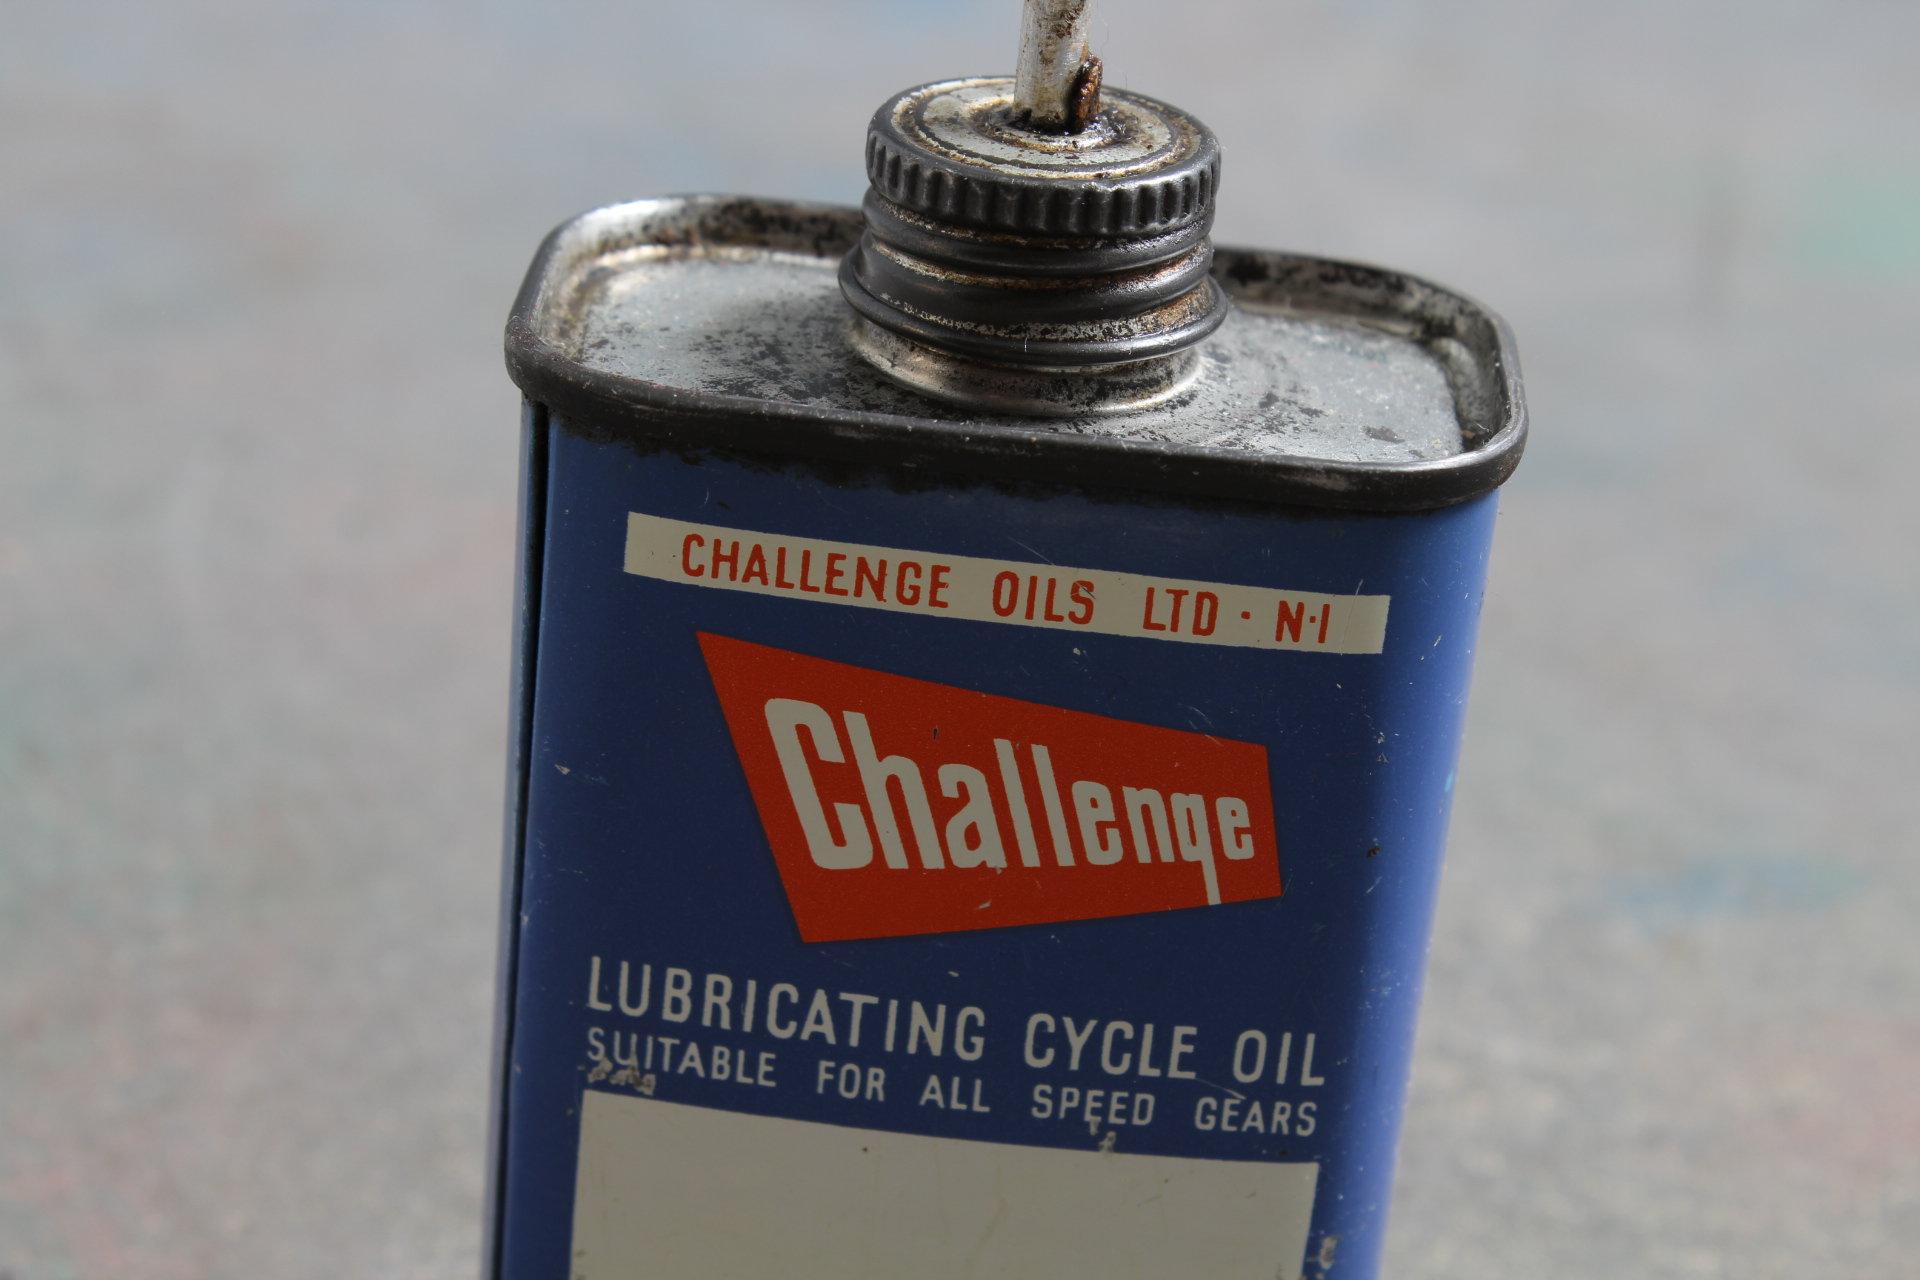 Vintage Challenge Cycling Oil Oiler Advertising Tin 4 oz